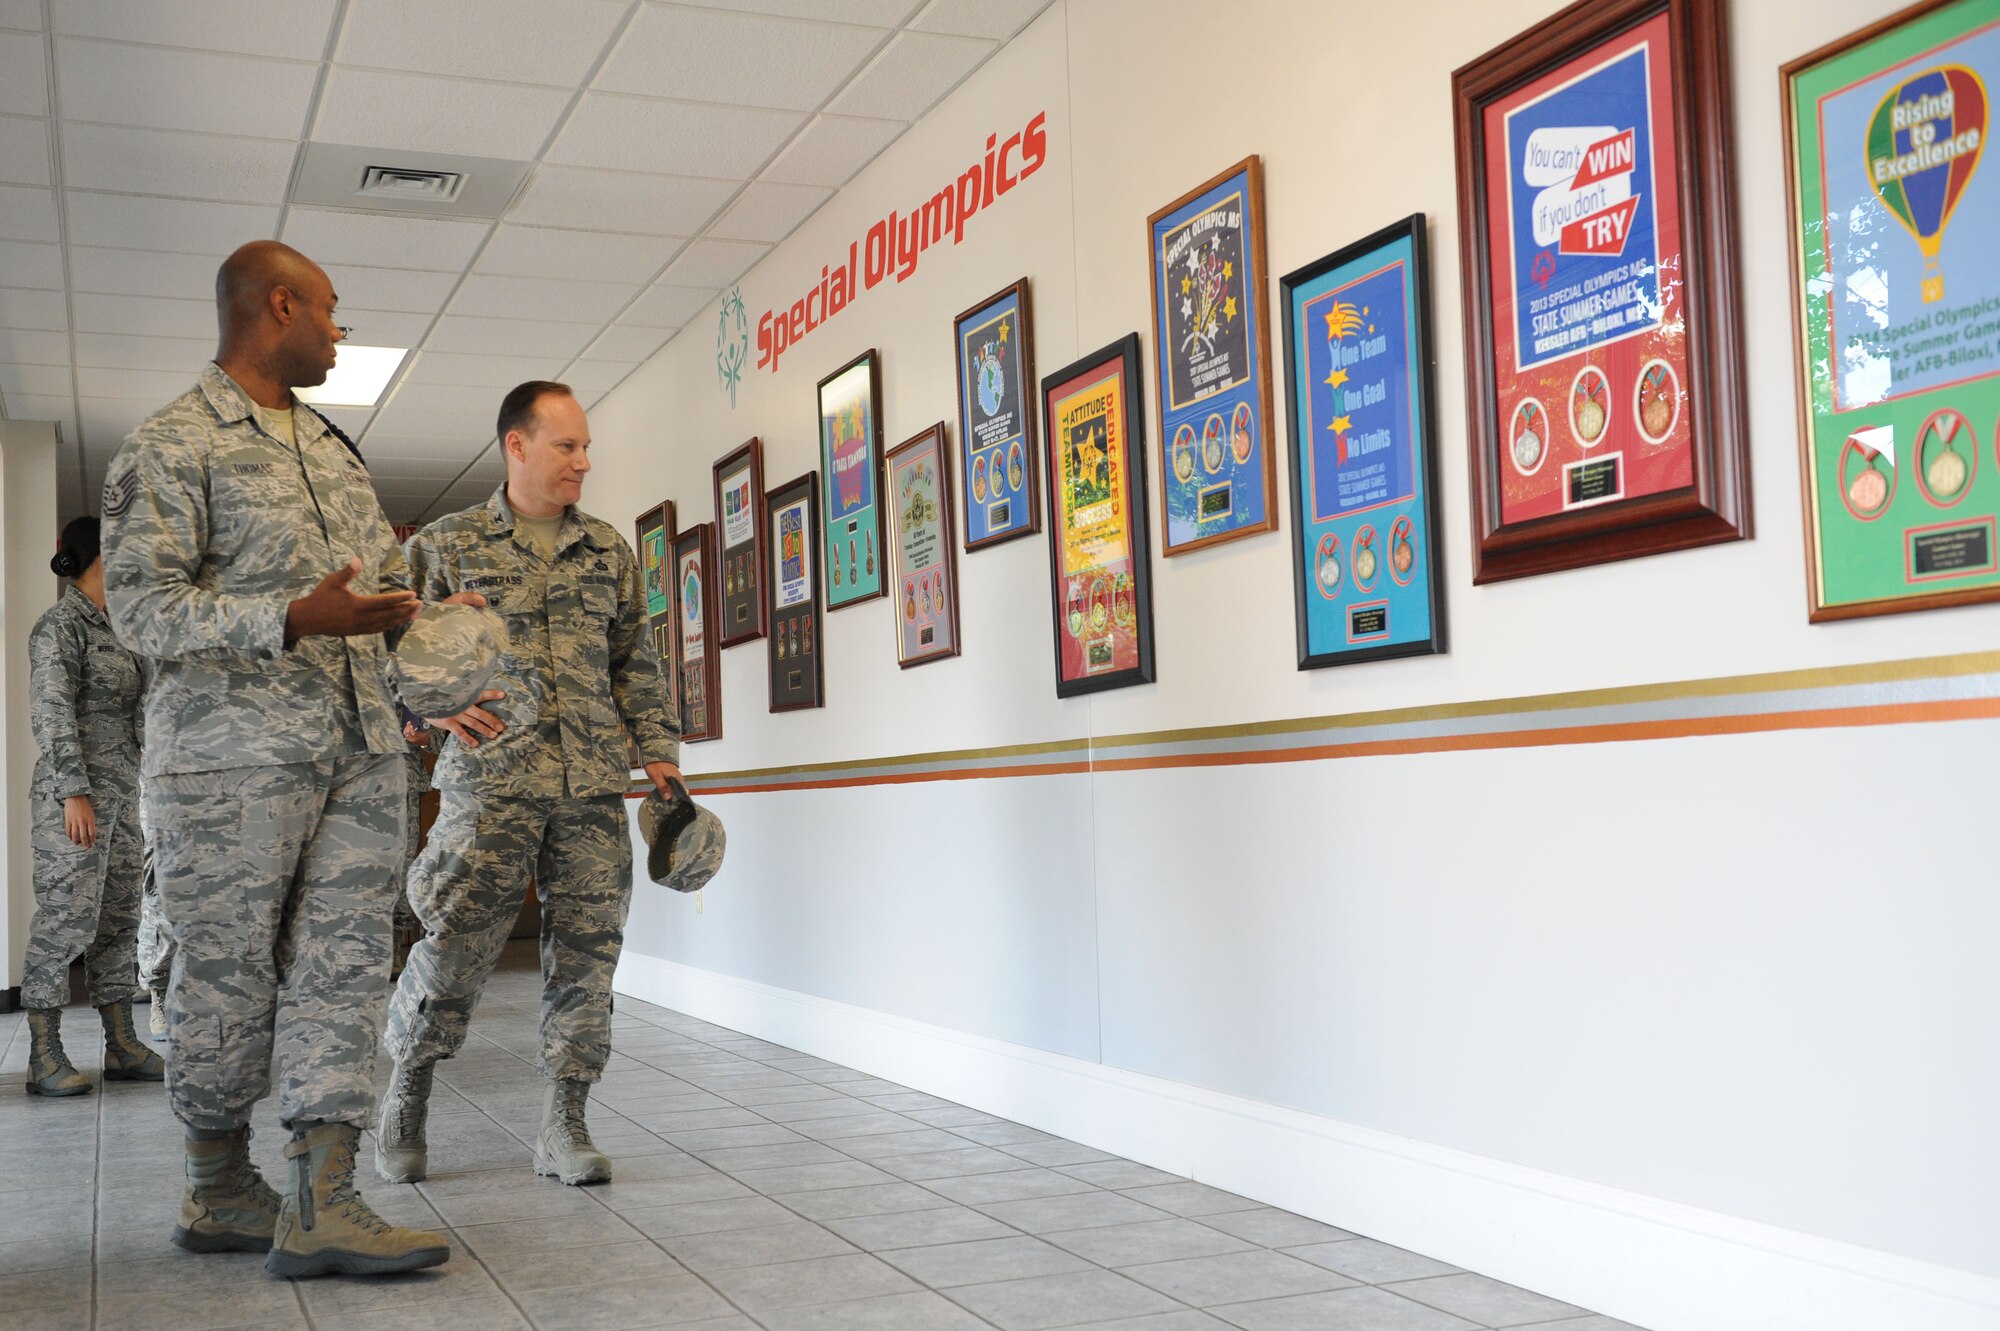 Tech. Sgt. James Thomas, 81st Training Group military training leader, briefs Col. Todd Weyerstrass, 2nd Air Force vice commander, on Keesler’s involvement with Special Olympics Mississippi Summer Games during an 81st Training Wing orientation tour at the Levitow Training Support Facility July 12, 2016, on Keesler Air Force Base, Miss. The purpose of the tour was to become familiar with the wing’s mission, operations and personnel. (U.S. Air Force photo by Kemberly Groue/Released)